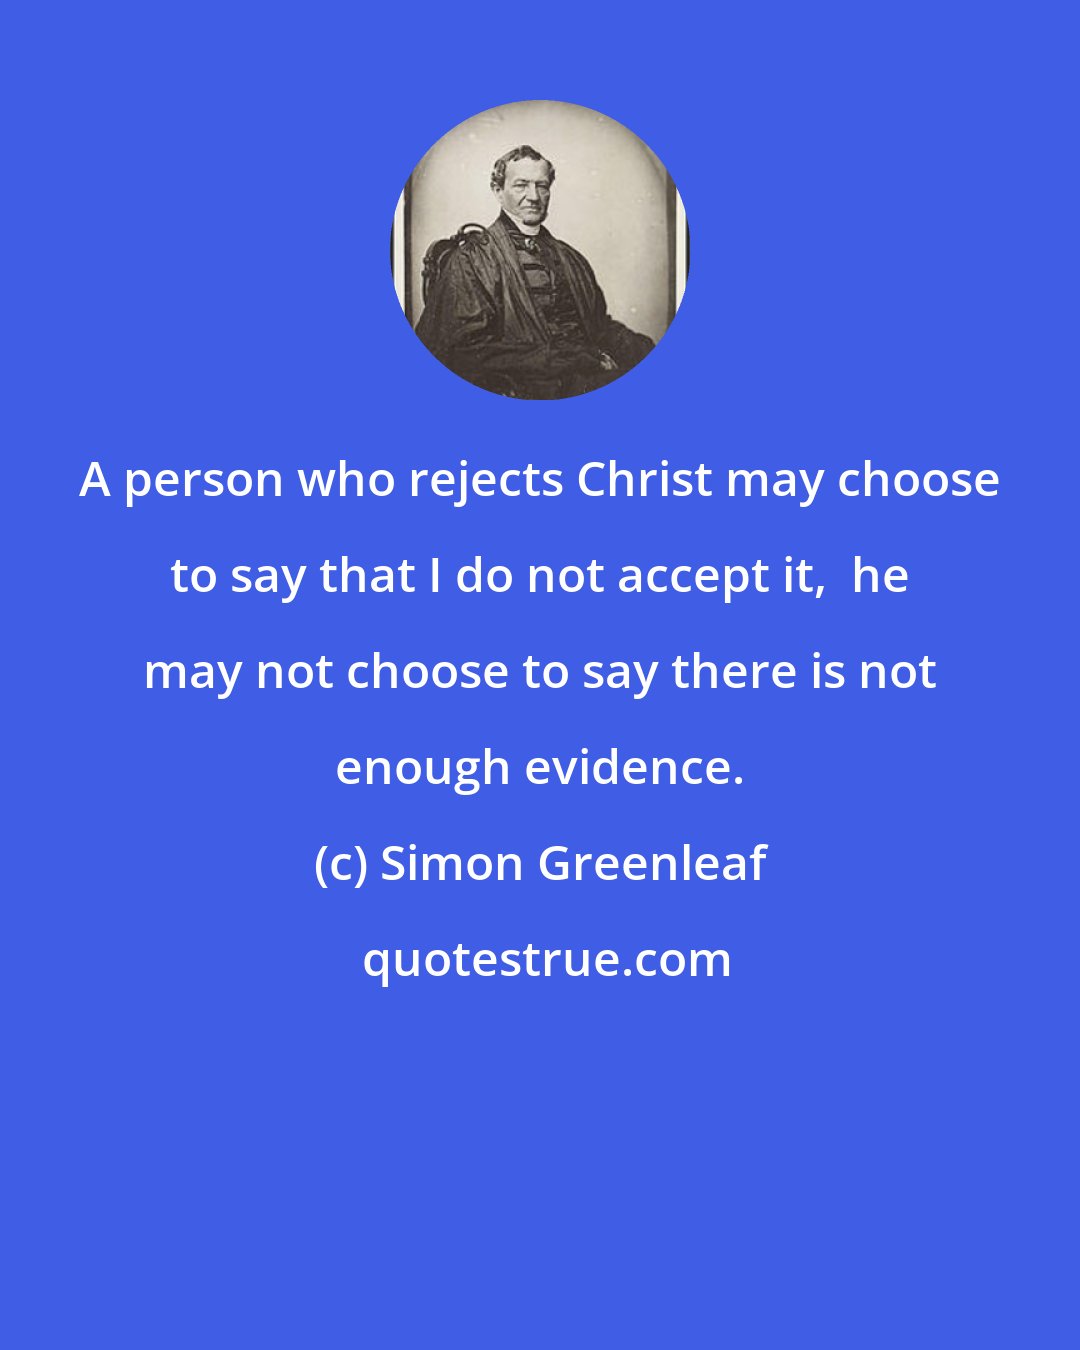 Simon Greenleaf: A person who rejects Christ may choose to say that I do not accept it,  he may not choose to say there is not enough evidence.